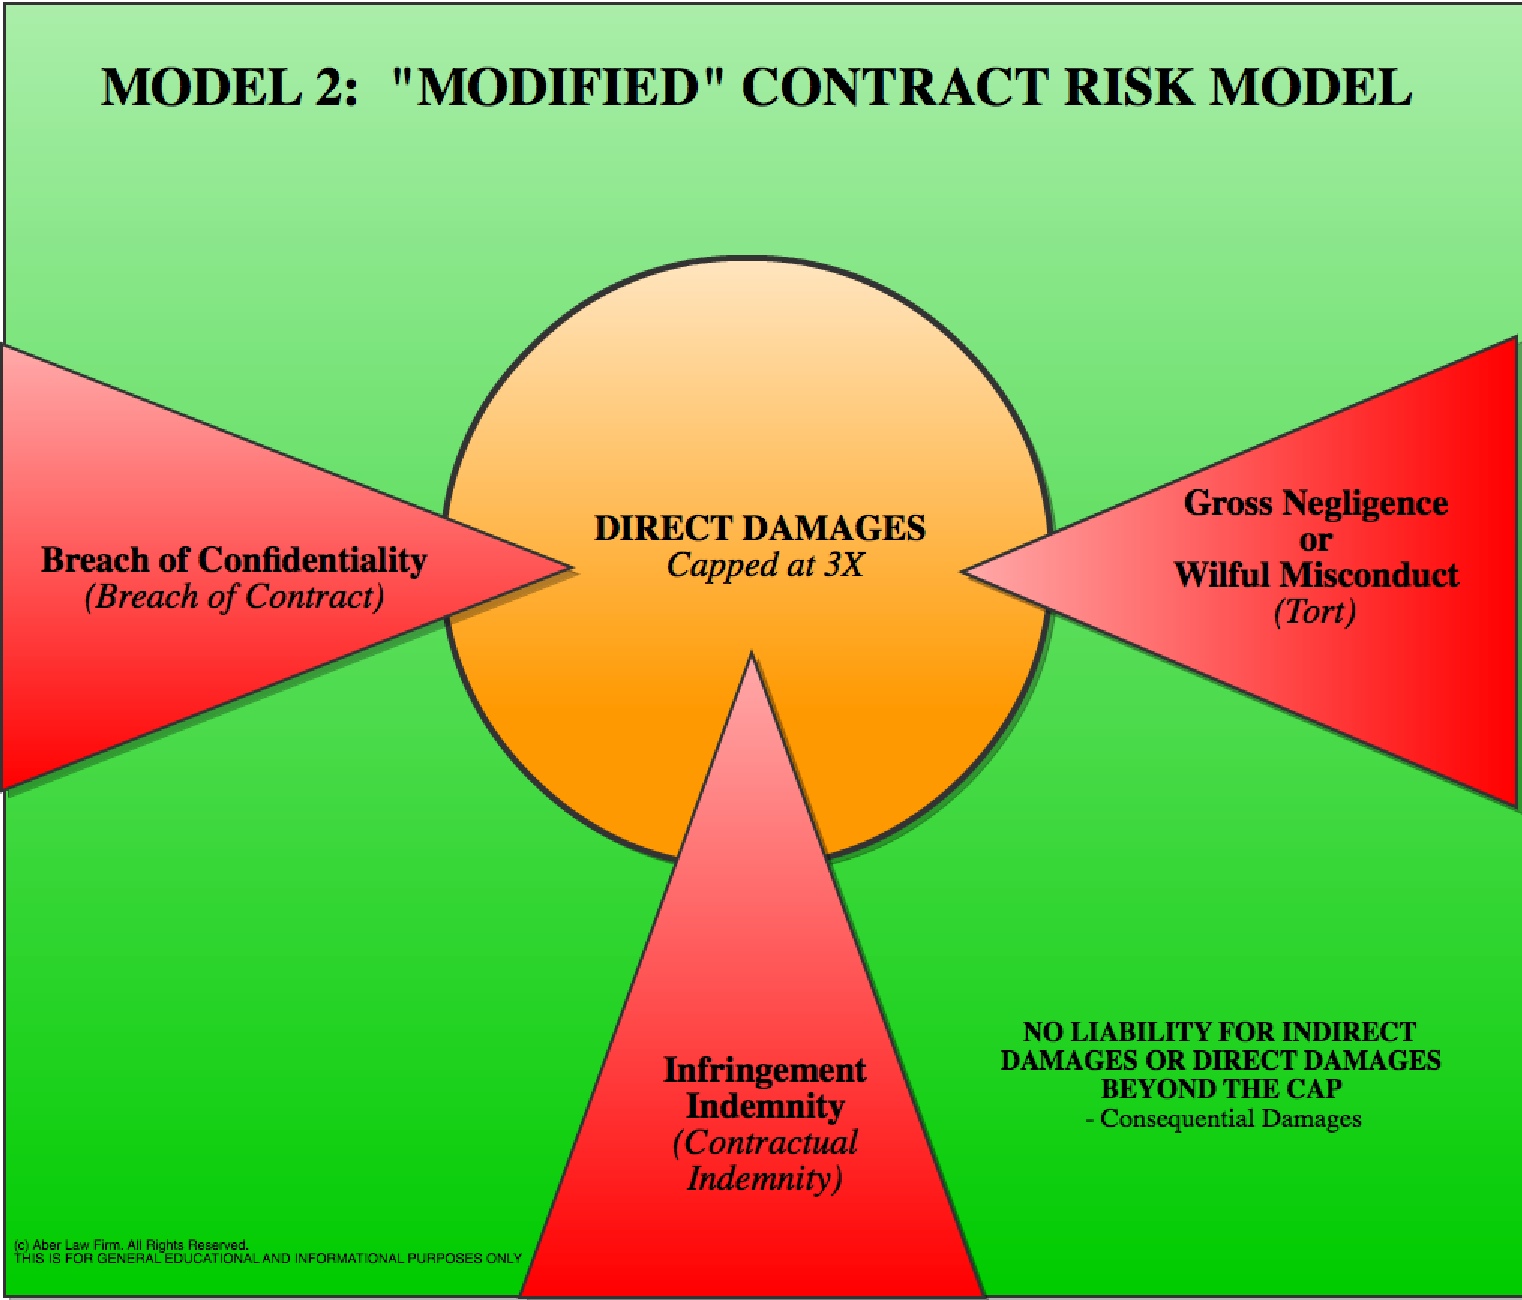 SaaS Agreement Liability Model 2 "Modified" Contract Risk Model Chart - Aber Law Firm